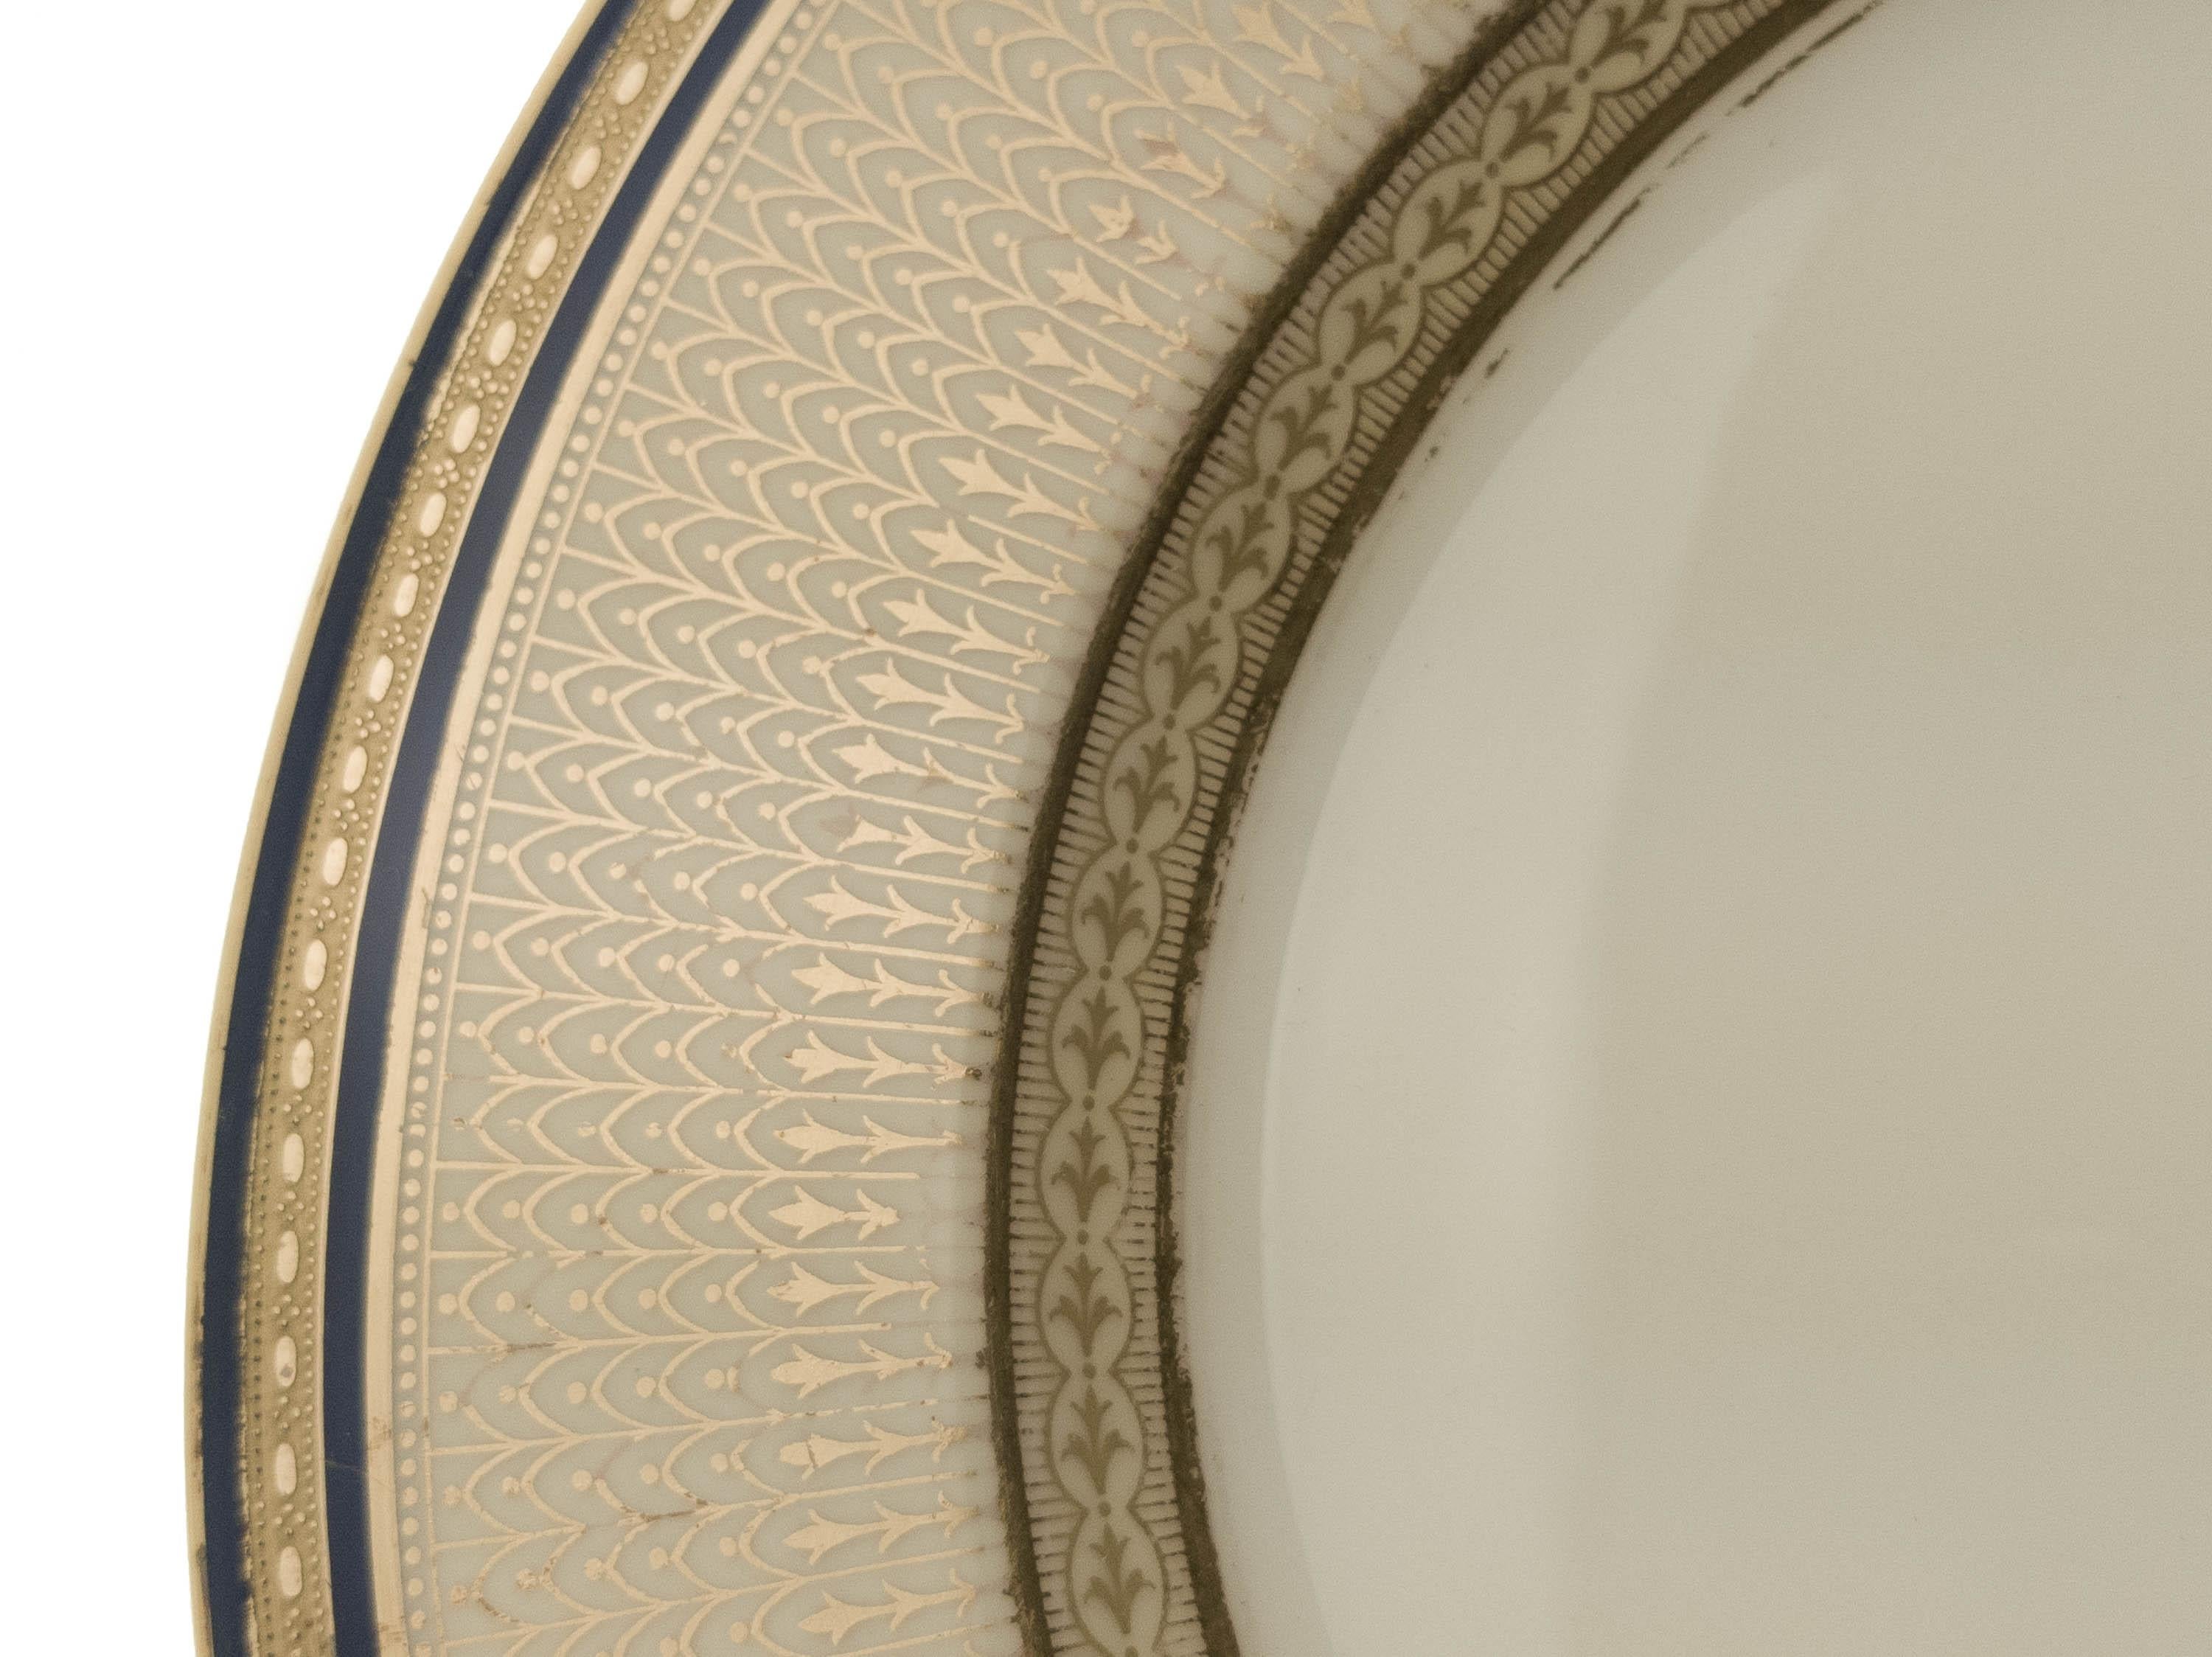 A Classic traditional set of dinner plates by one of America's premier fanctories, Lenox. Custom ordered through the fine gilded age retailer of Wiss & Sons. These plates feature a double band of rich cobalt blue and an interesting mix